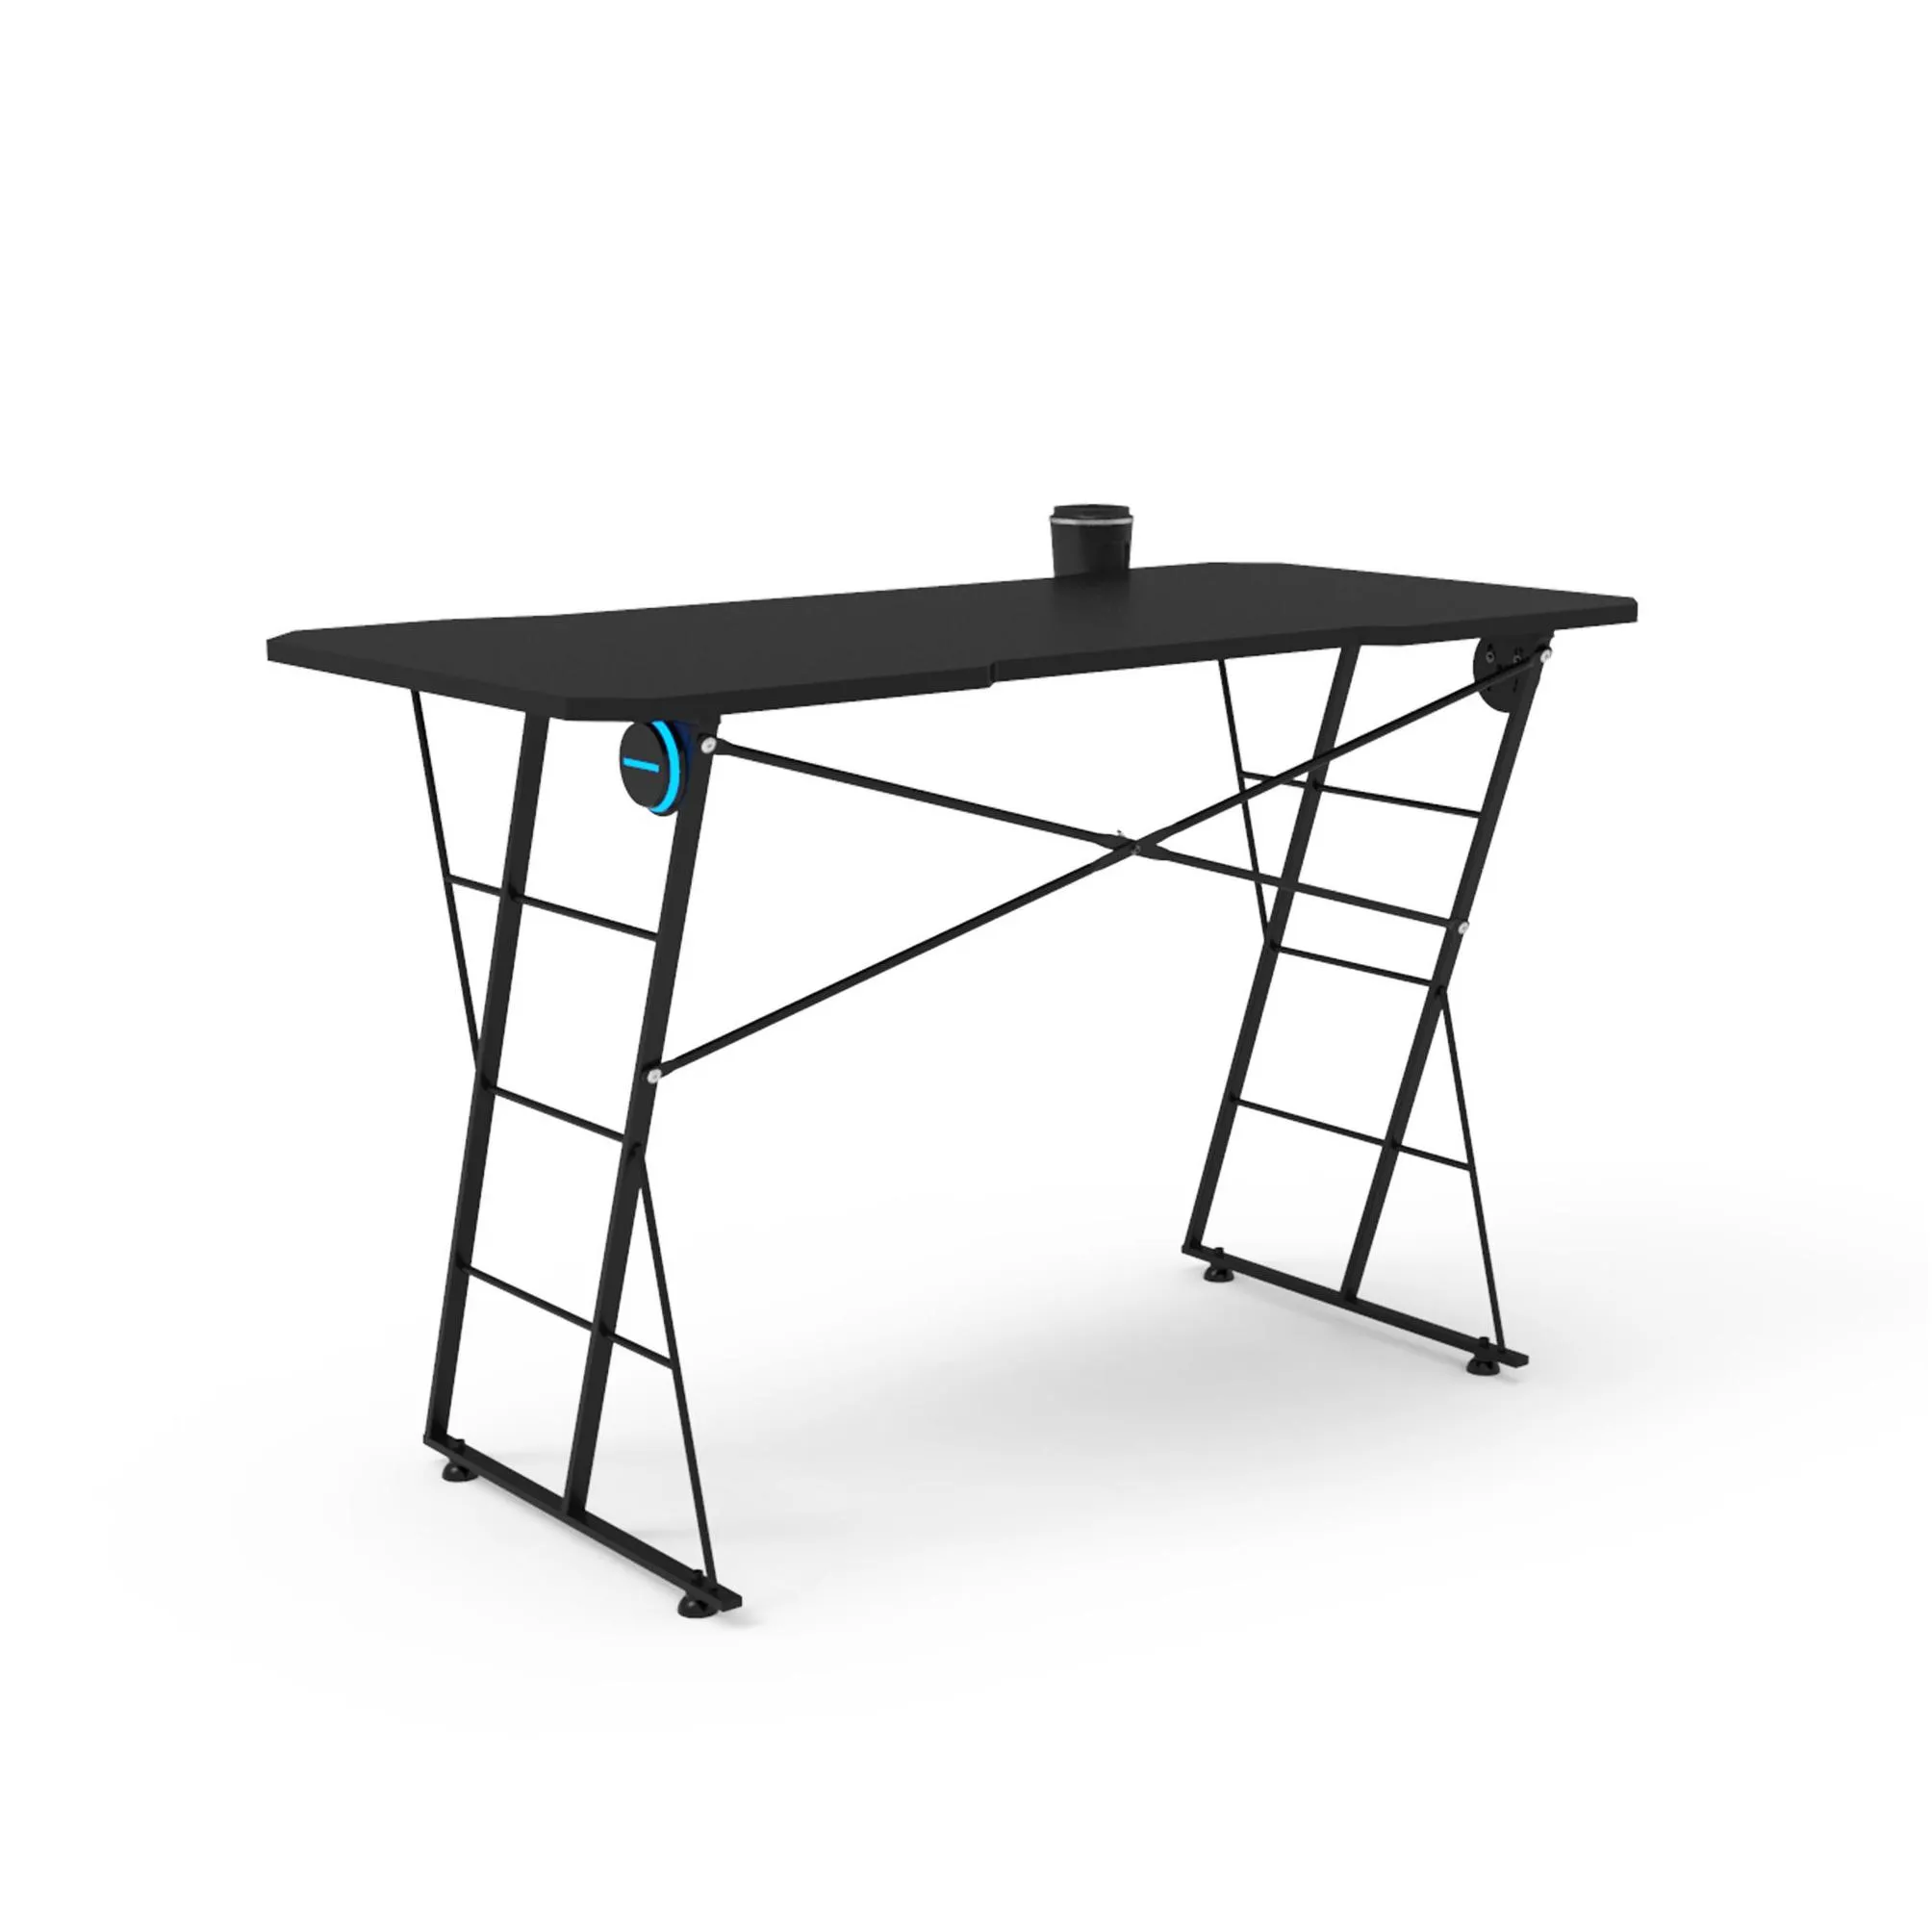 Ergonomic gaming computer desk Furniture Home Office Desk, Portable Folding Table Writing Study Desks Modern Simple PC for small spaces